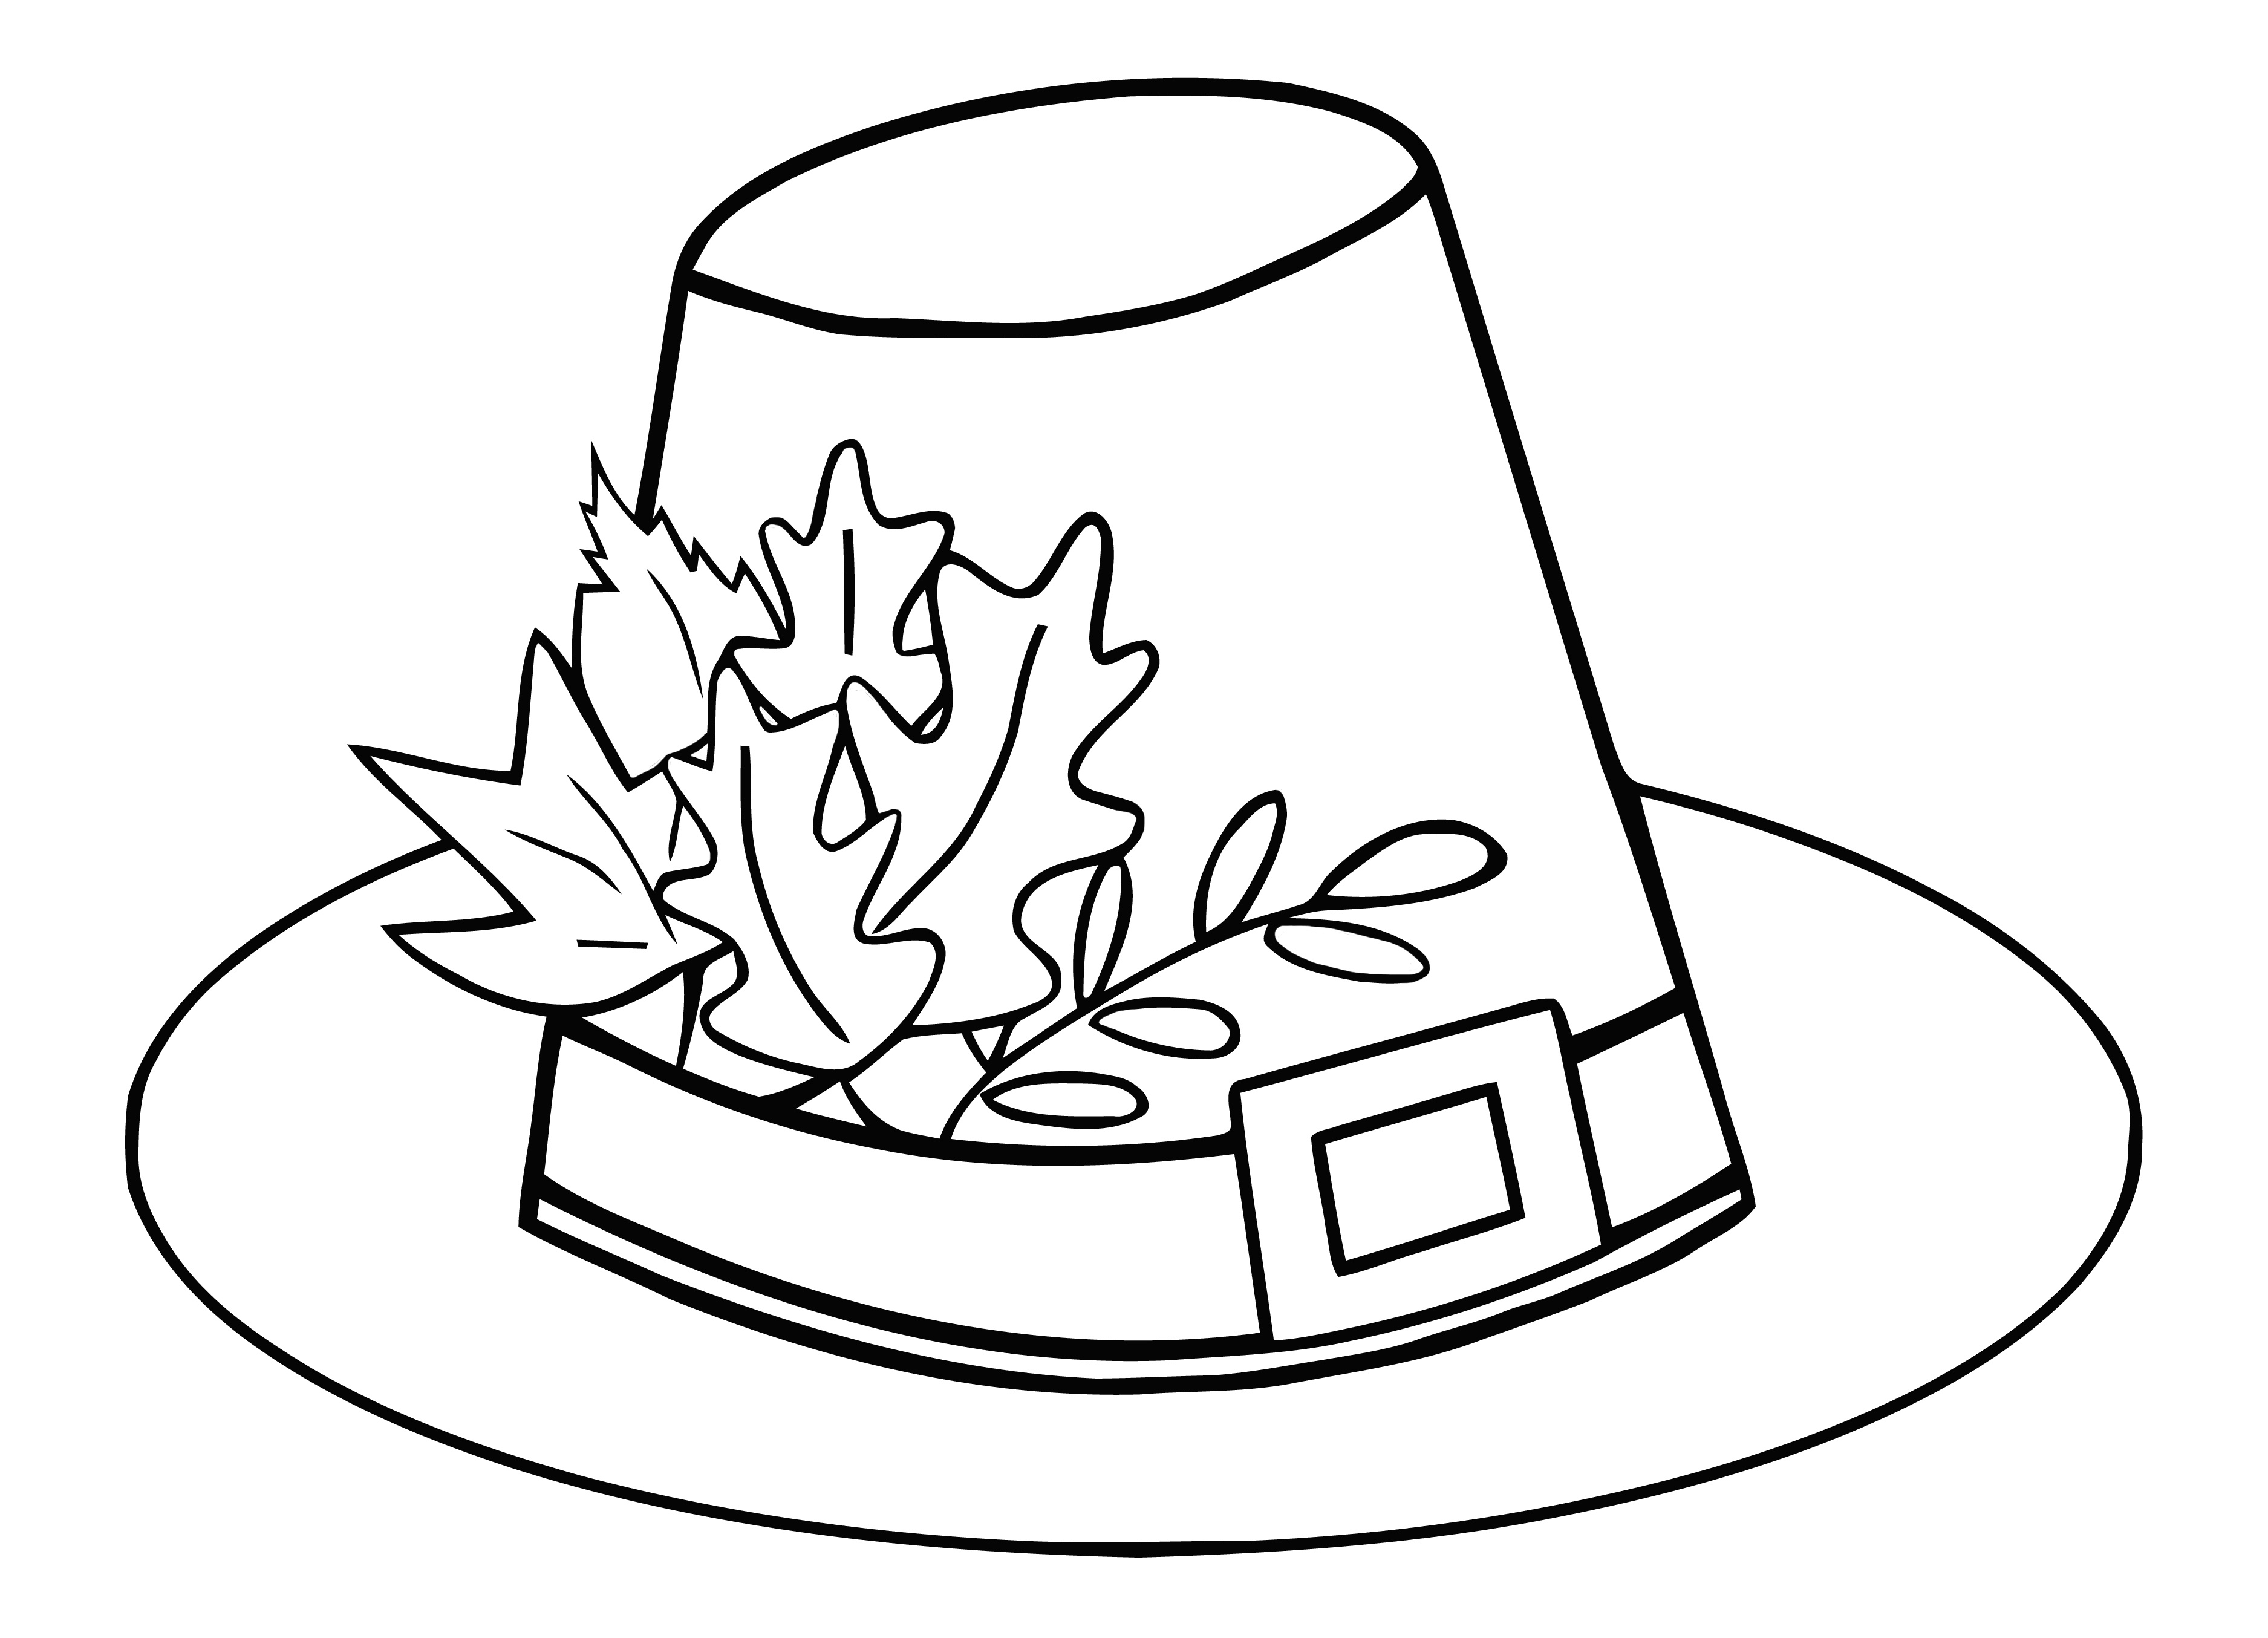 Thanksgiving Coloring Pages Pilgrim's Hat